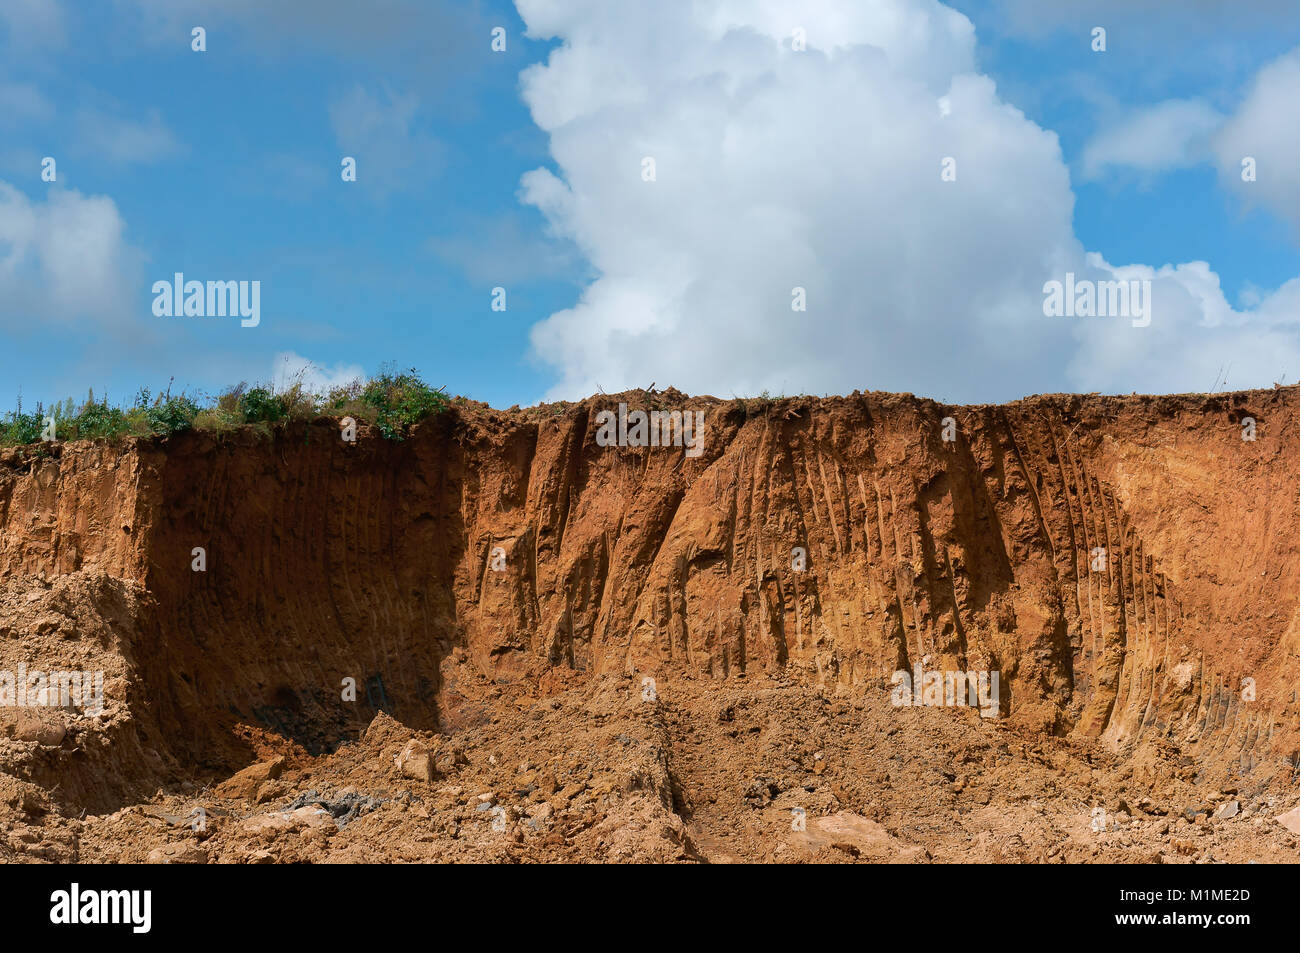 quarry sand, soil disturbance by extraction of minerals Stock Photo